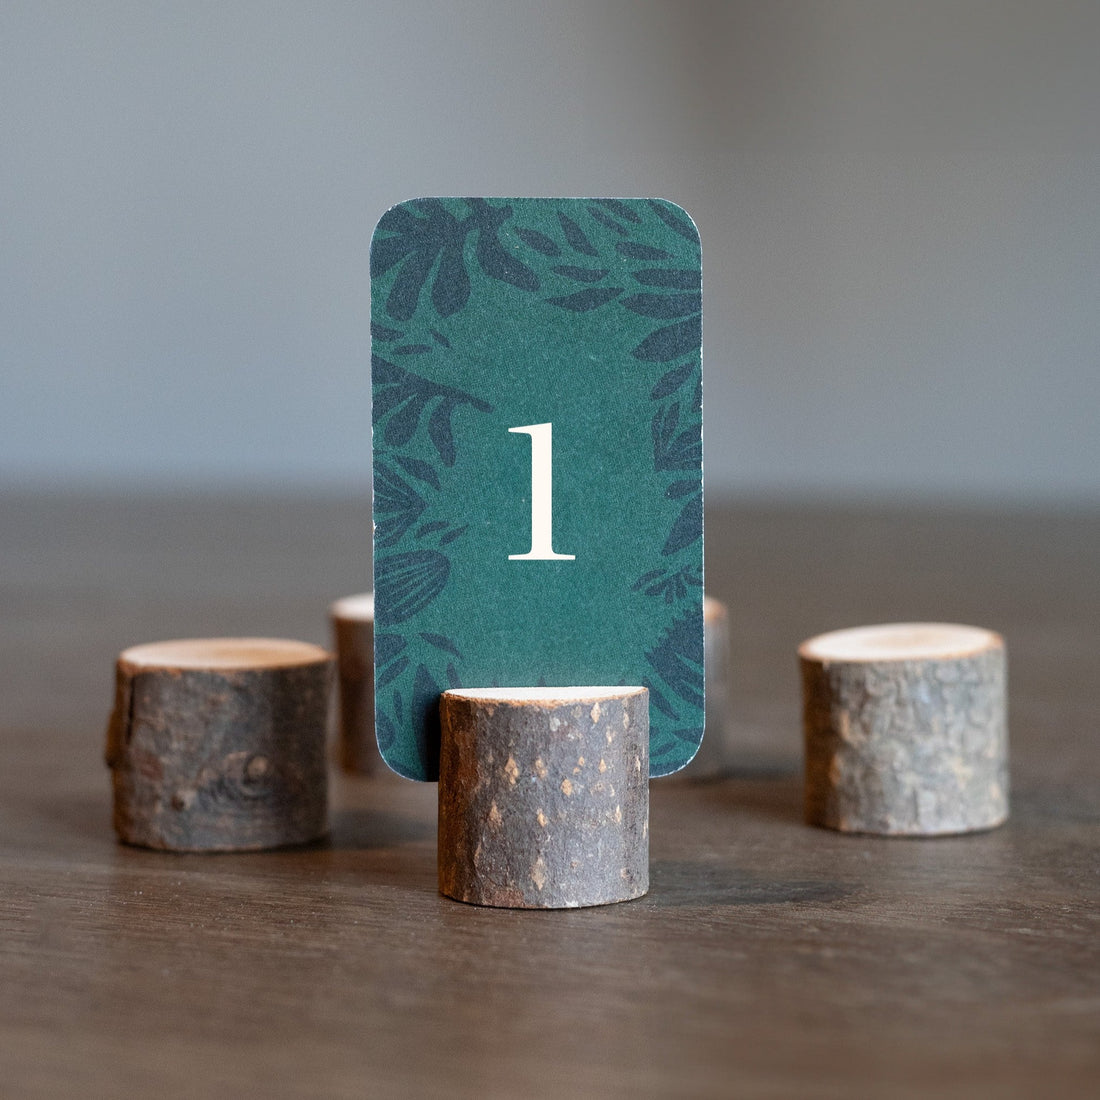 Rent wooden table card holders, perfect for a rustic touch in Edmonton, Sherwood Park, Leduc, St. Albert events. Ideal for displaying signs at tables, catering stations, and beyond, seamlessly infusing nature into your decor.